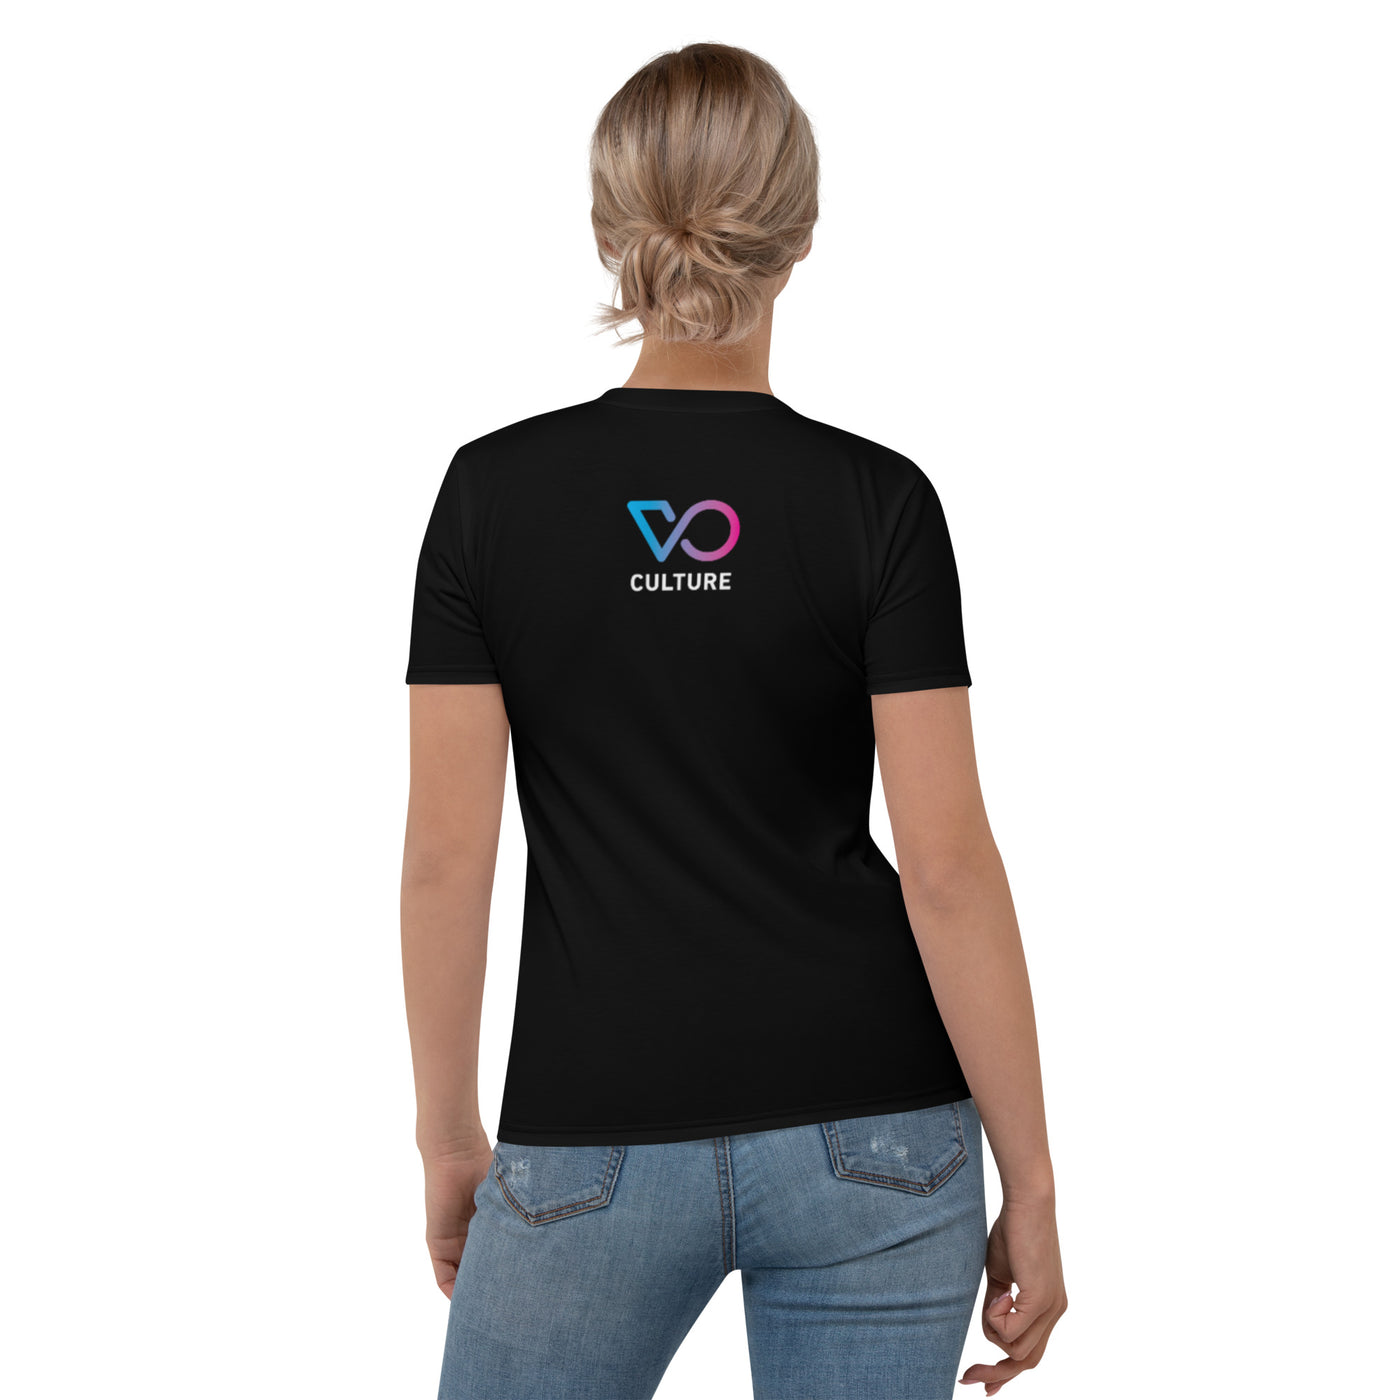 CHECK YOUR LEVELS Women's T-shirt